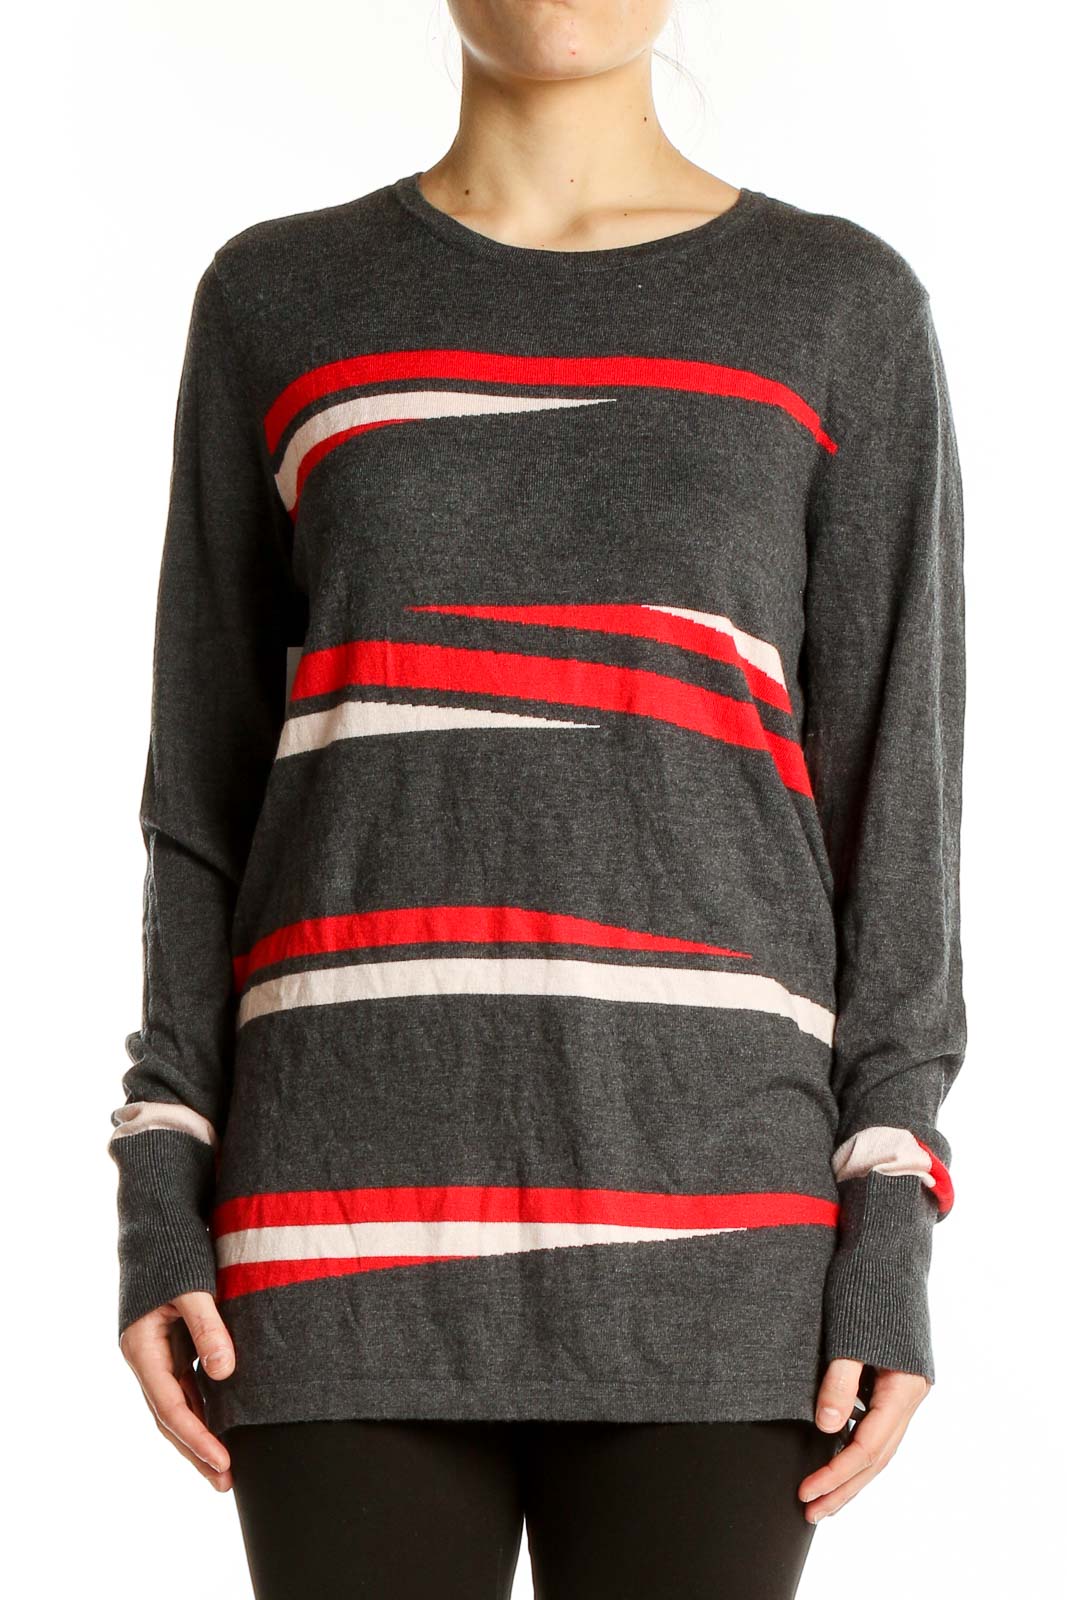 Black Red Stripe Sweater Front